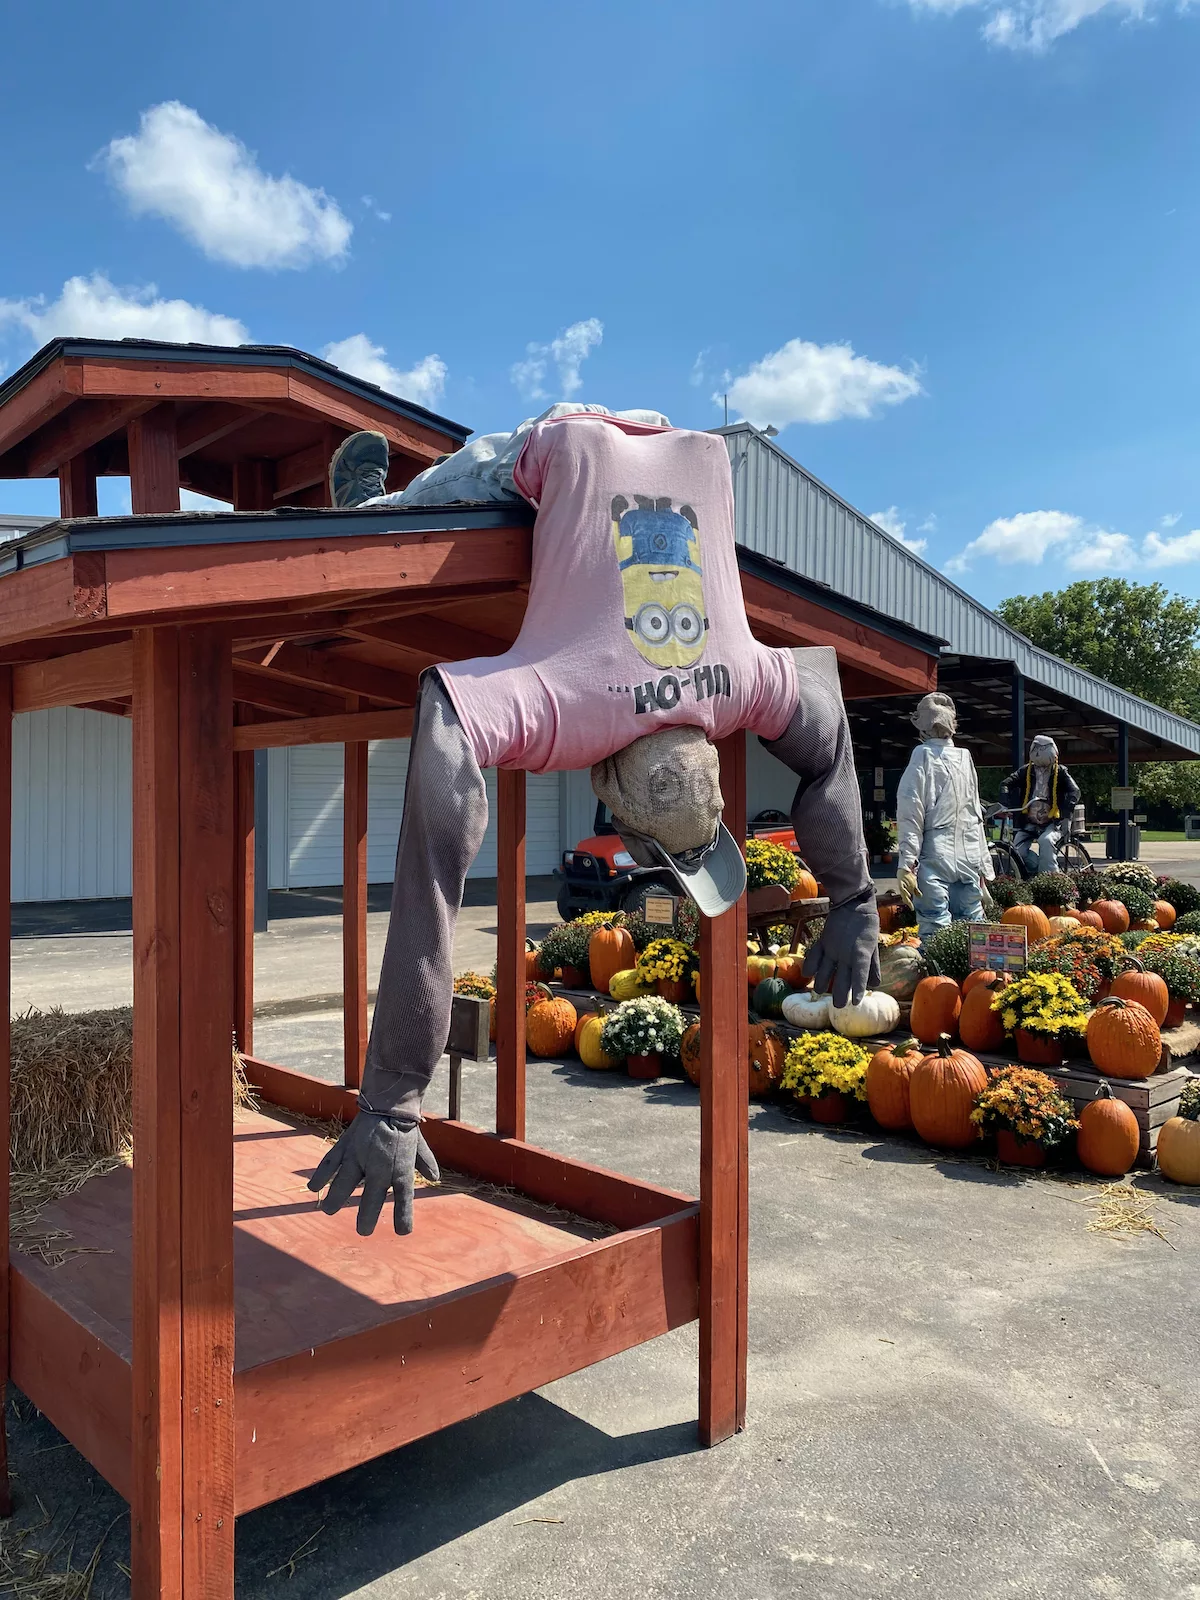 Scarecrow hanging upside down at Skelly's Farm Market in Janesville, Wisconsin